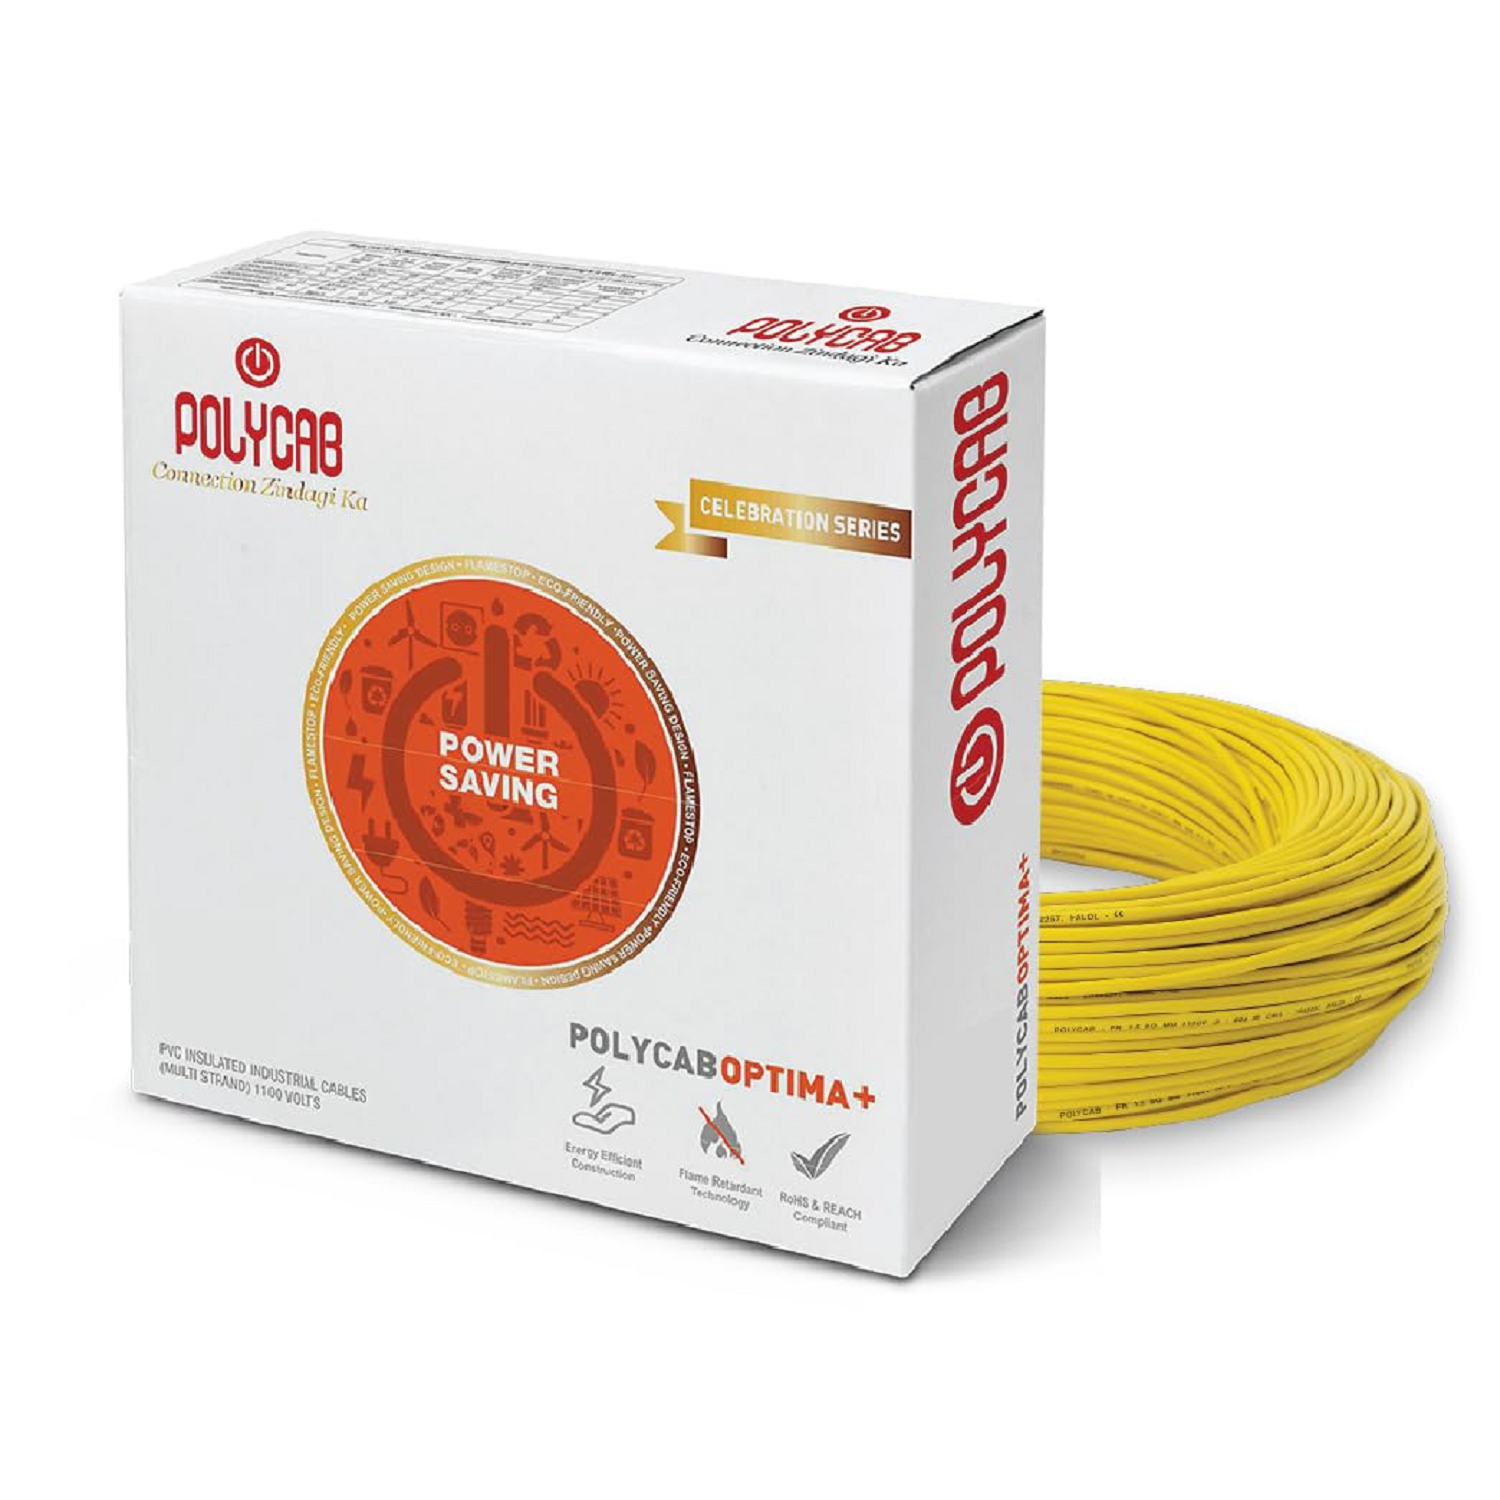 Polycab Optima Plus FR-LF 4.0 SQ-MM, 90 Meters PVC Insulated Copper Wire Single Core (Yellow)